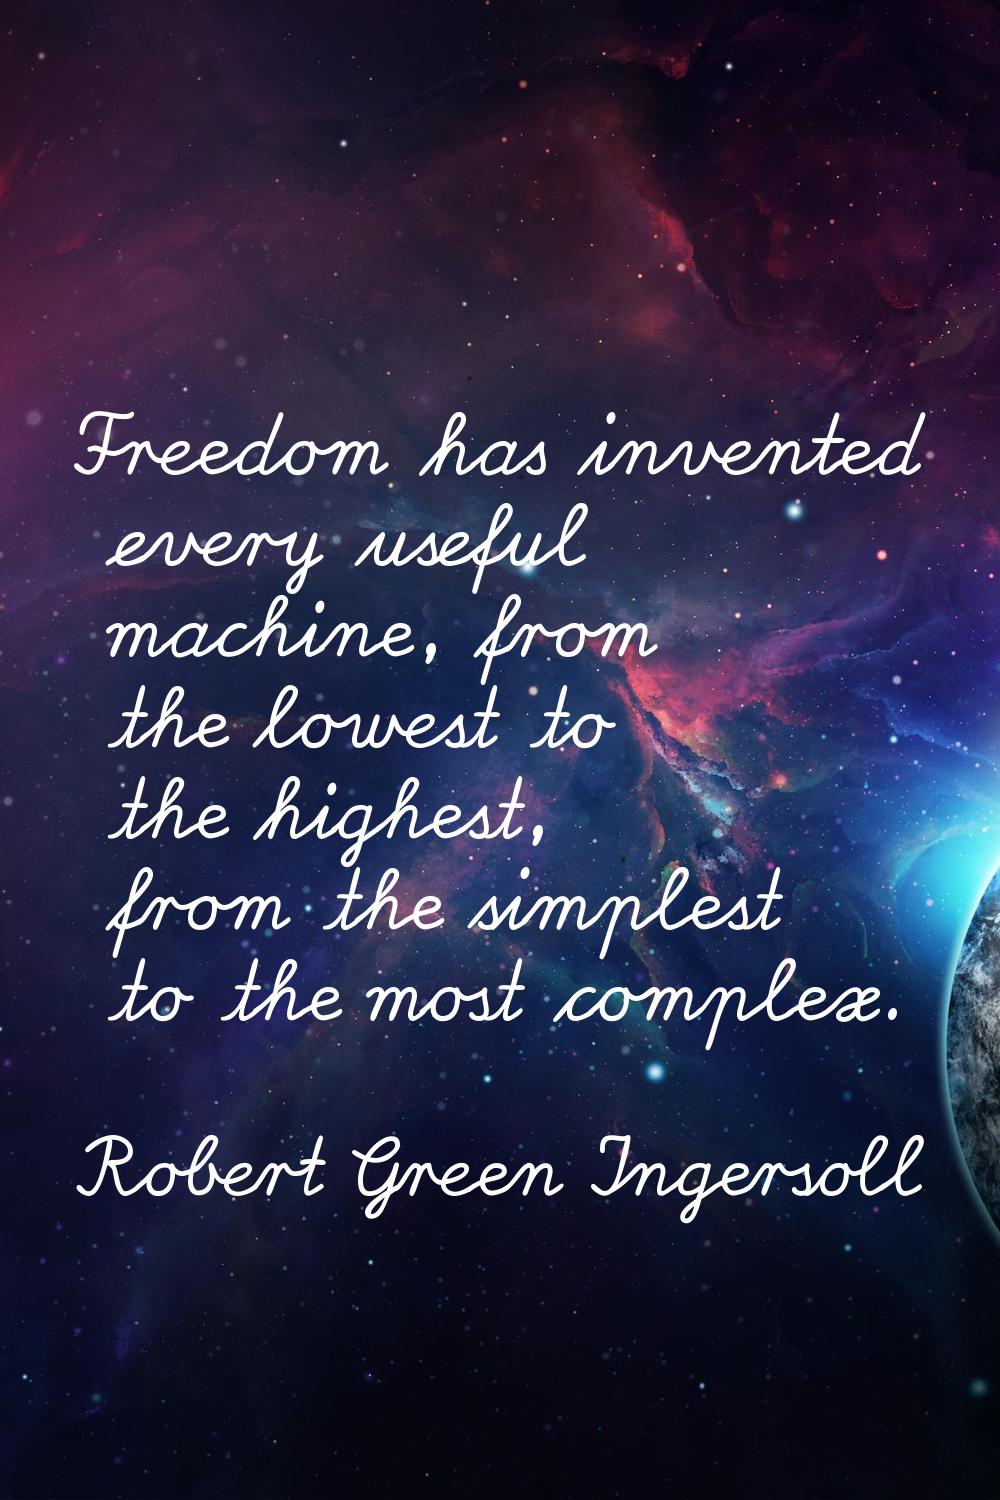 Freedom has invented every useful machine, from the lowest to the highest, from the simplest to the